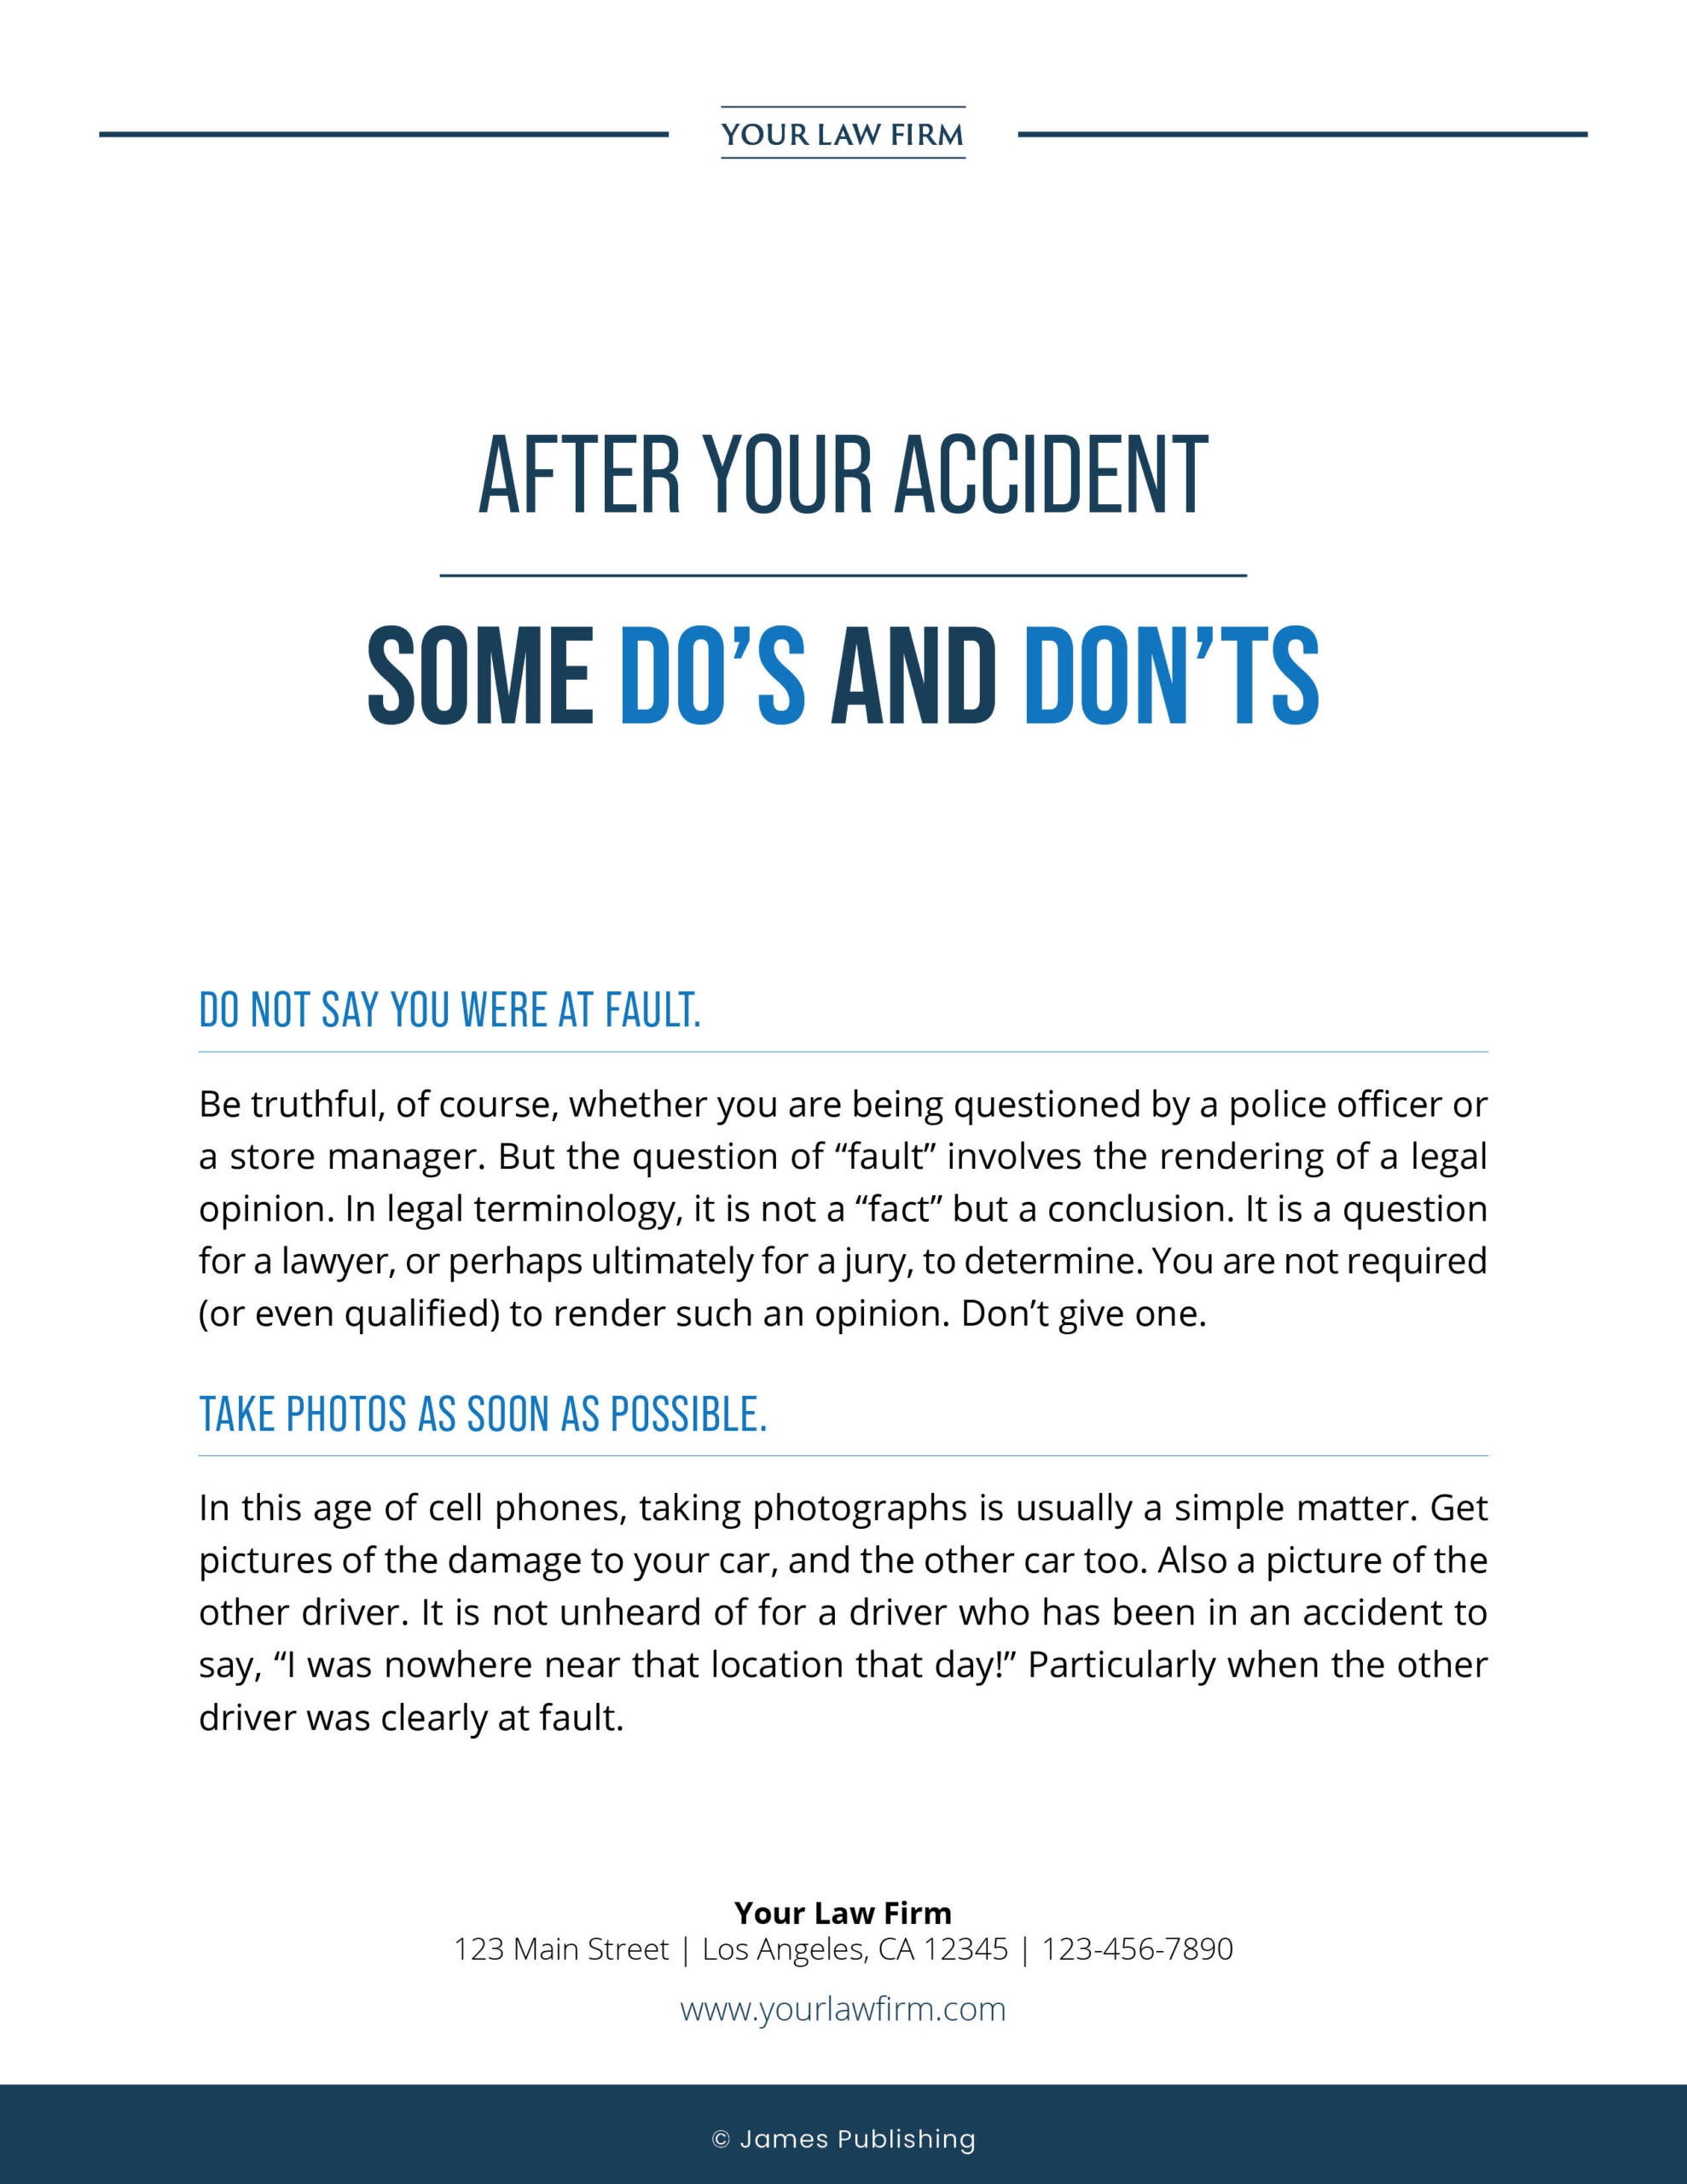 PI-14 After Your Accident: Some Do's and Don'ts